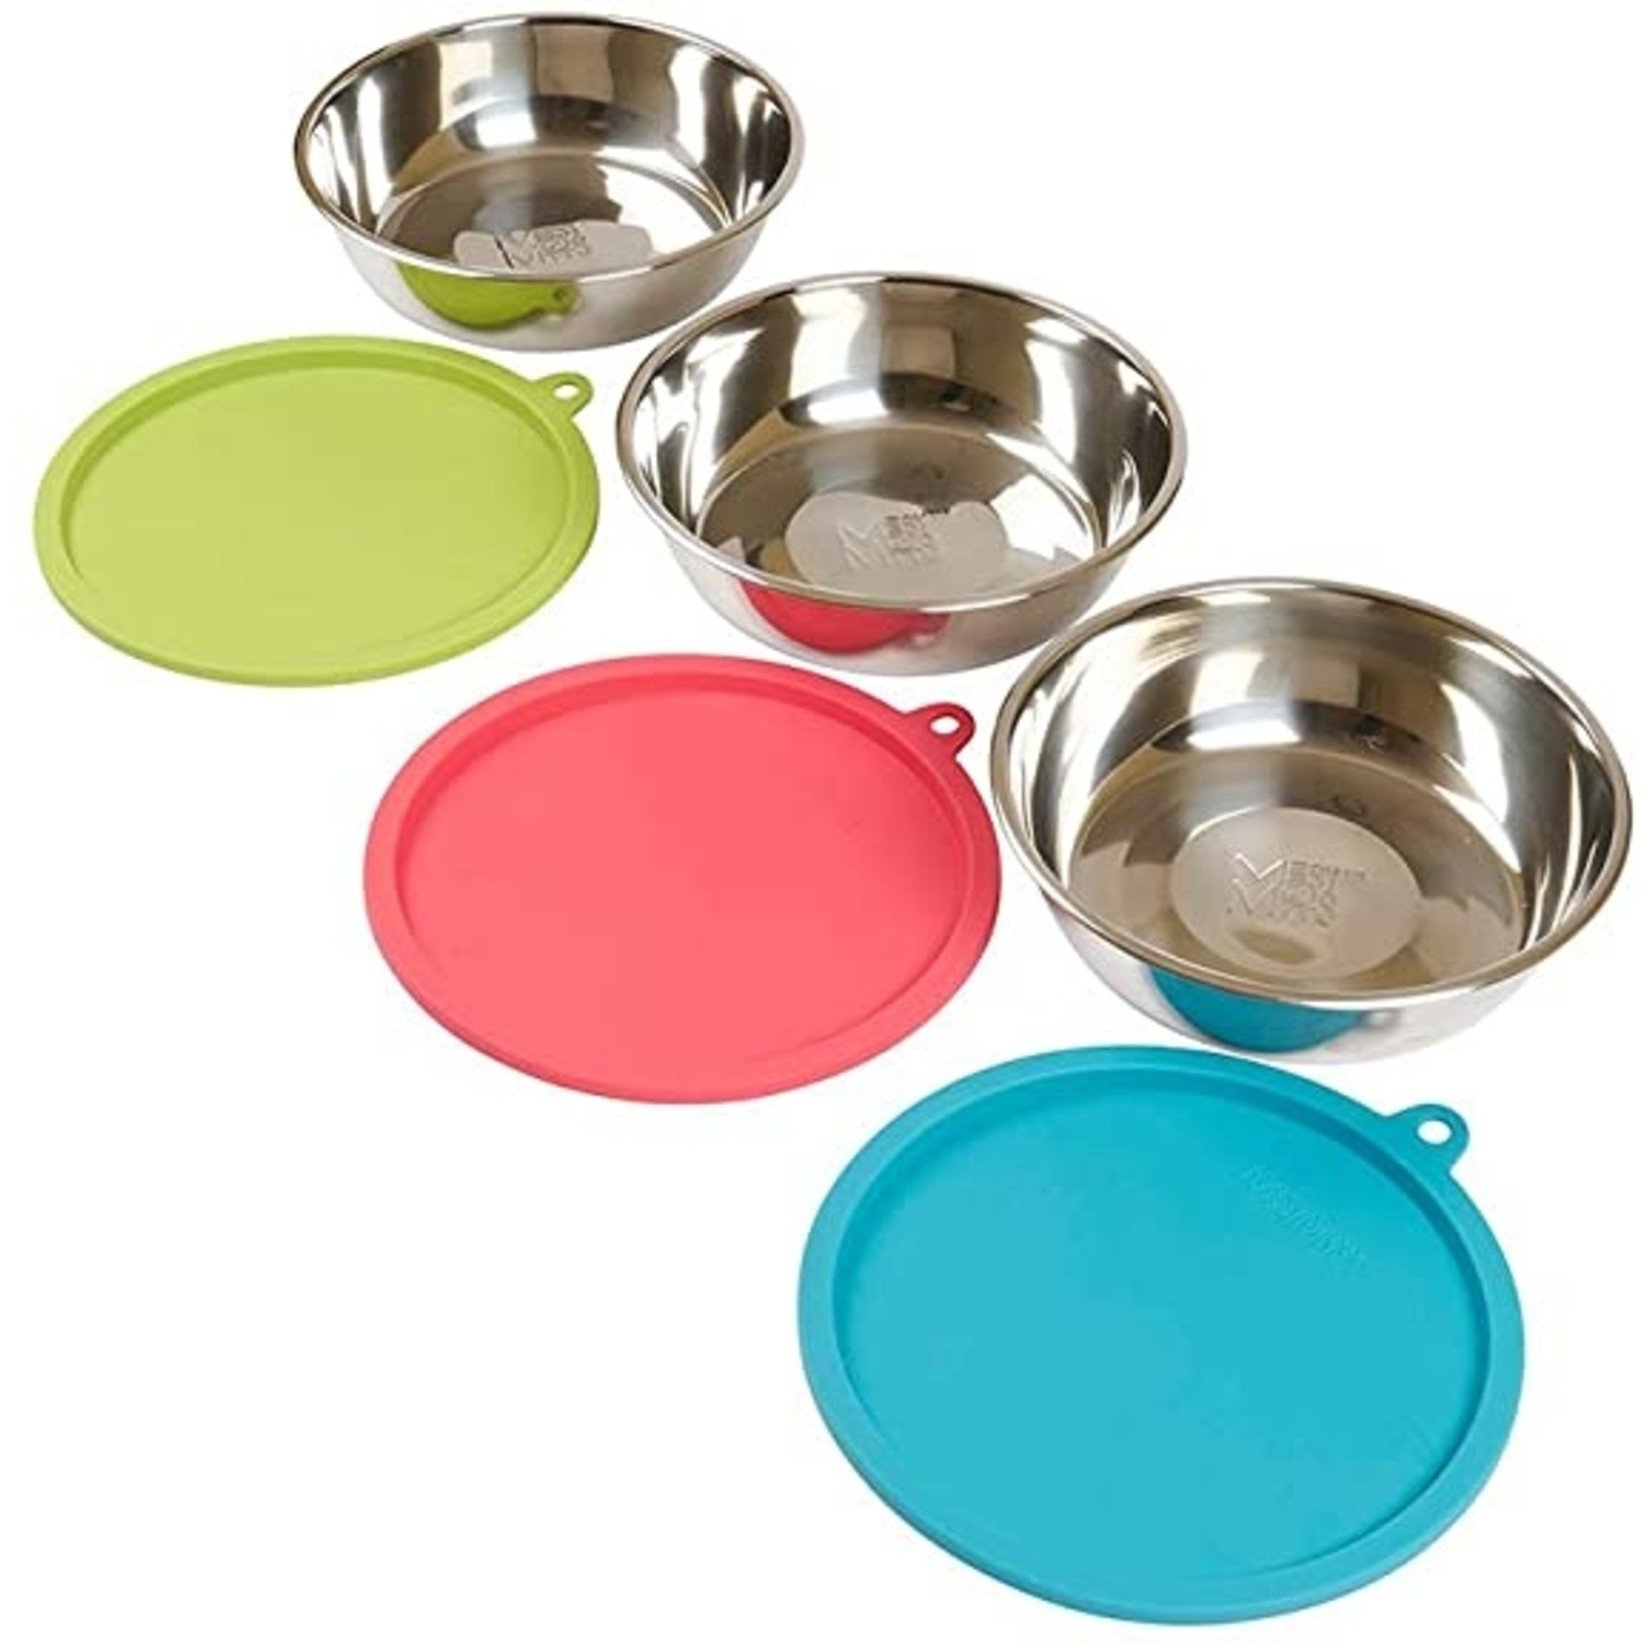 Messy Mutts Messy Mutts S/S BOWL SET MEDIUM 6 PC 3 BOWLS 3 COVERS 1.5 CUP